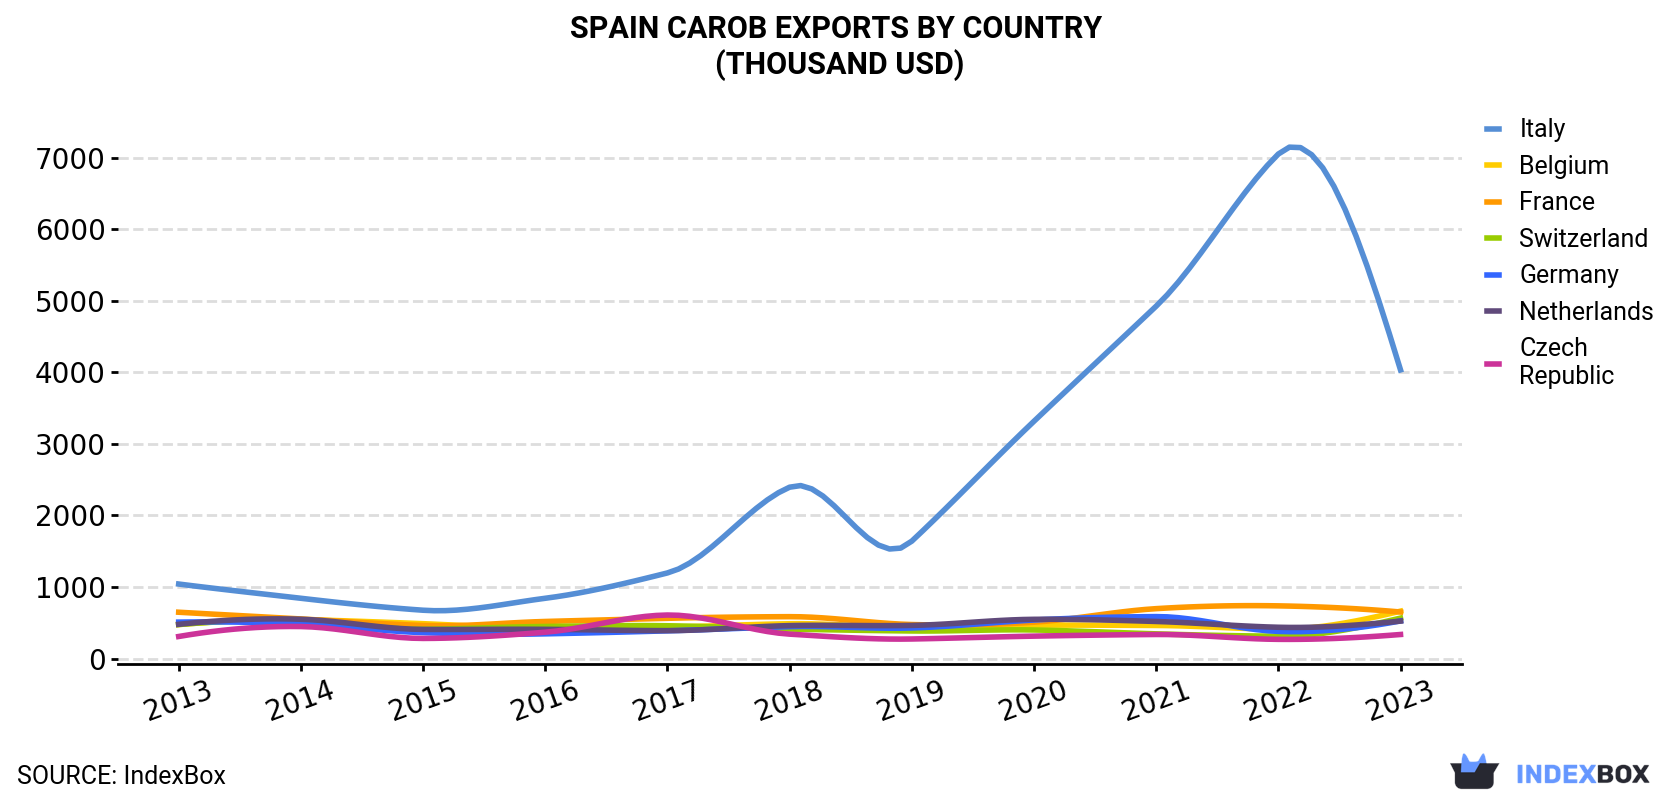 Spain Carob Exports By Country (Thousand USD)